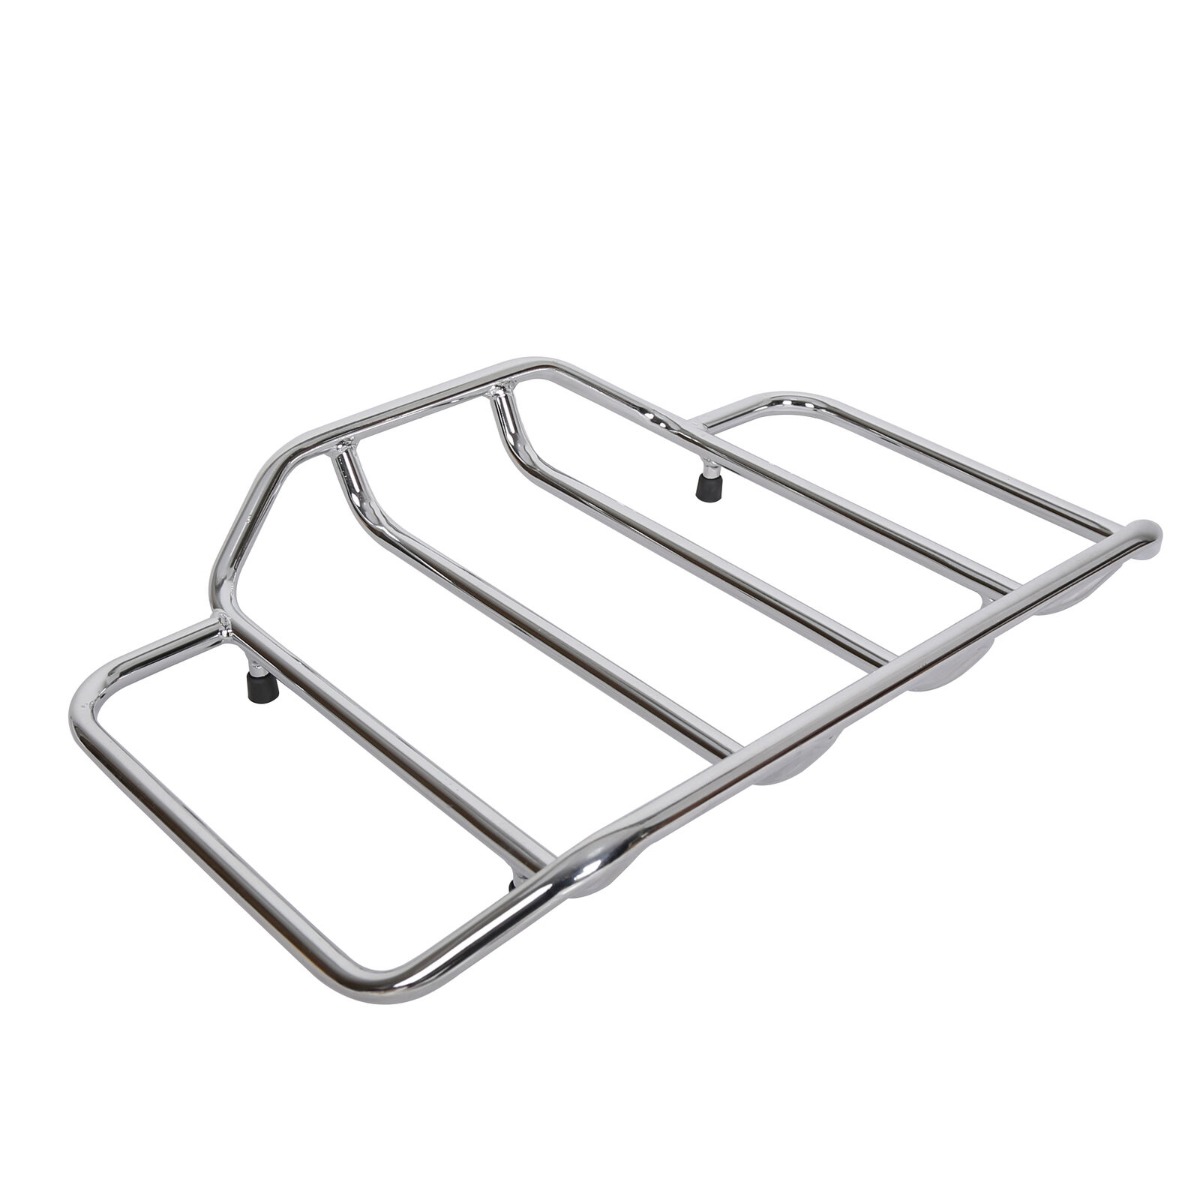 Chrome Luggage Rack Trail For Harley Air Wing Tour Pak Trunk Pack 1993-2013 Harley Electra Street Glide 